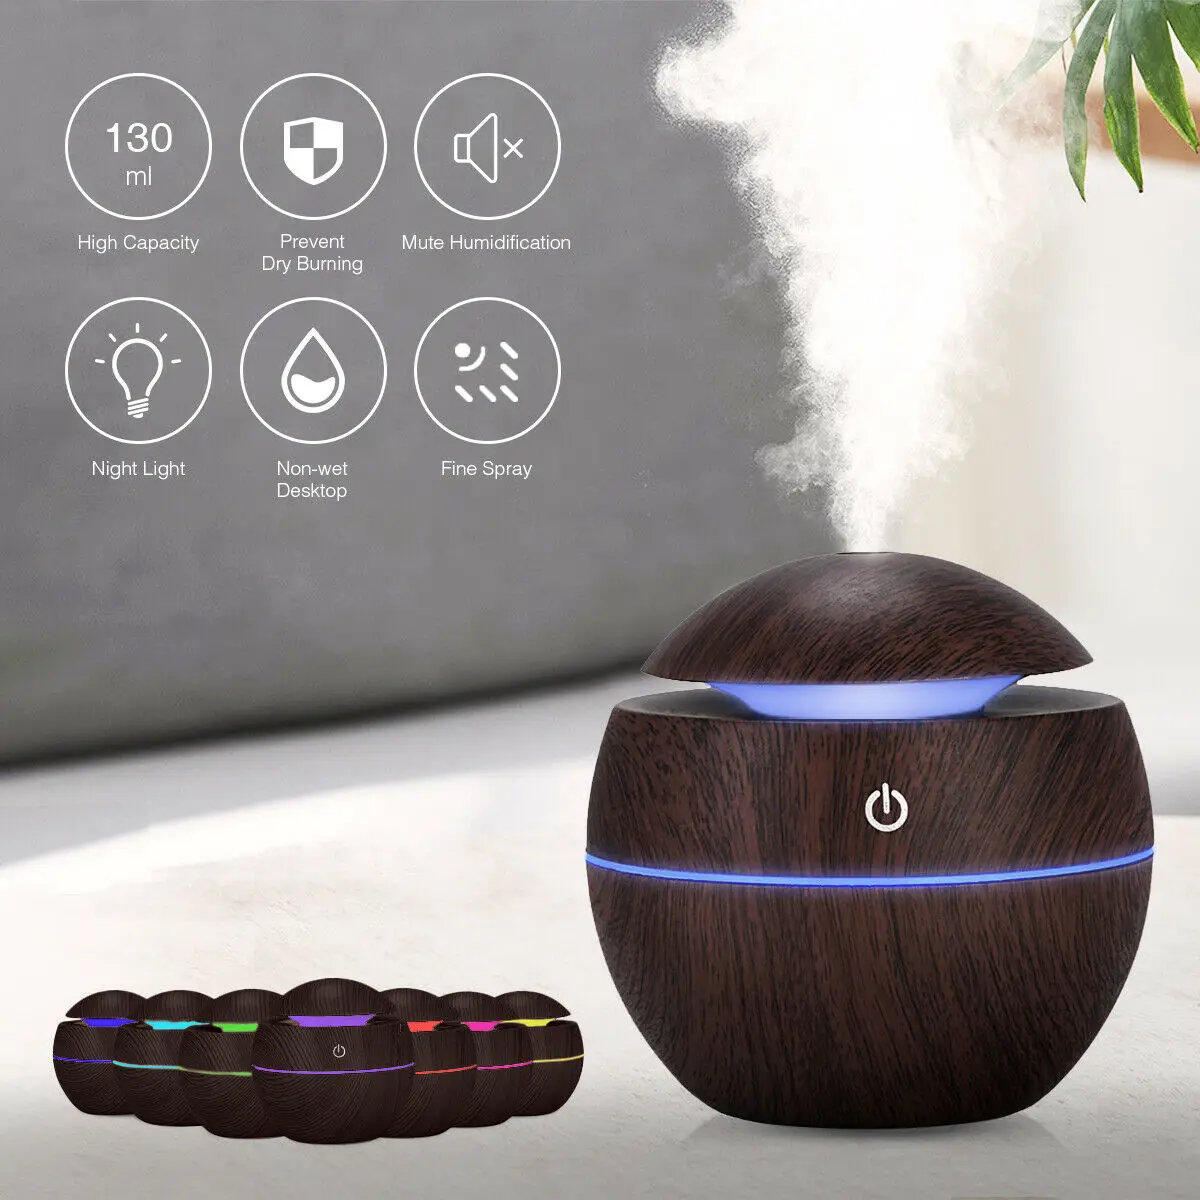 USB LED Humidifier Ultrasonic Essential Oil Diffuser Aroma Aromatherapy Purifier